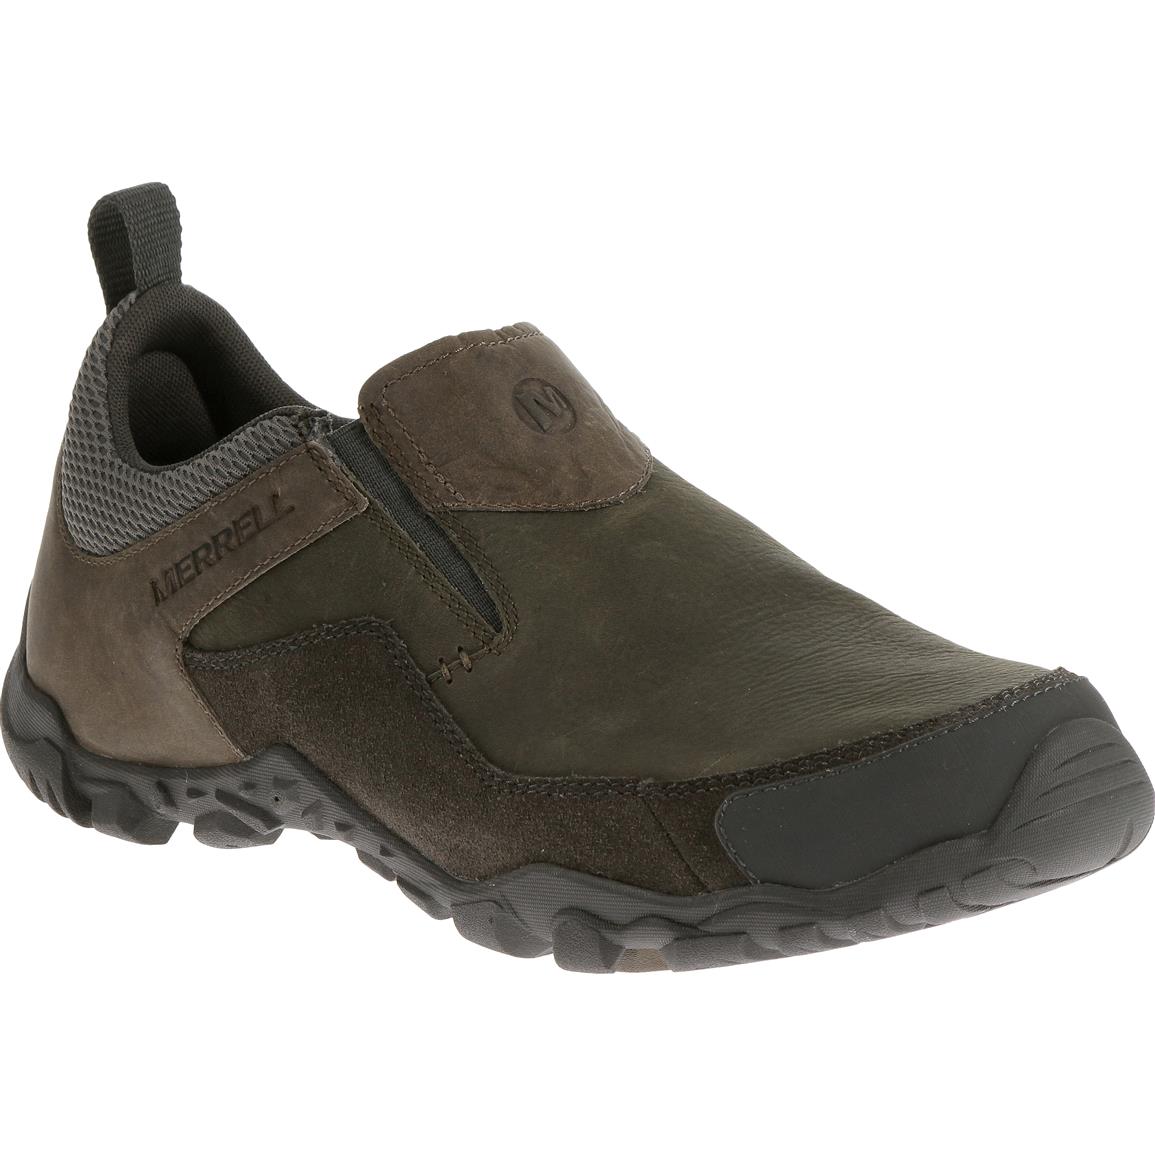 Merrell Telluride Mocs - 654142, Casual Shoes at Sportsman's Guide